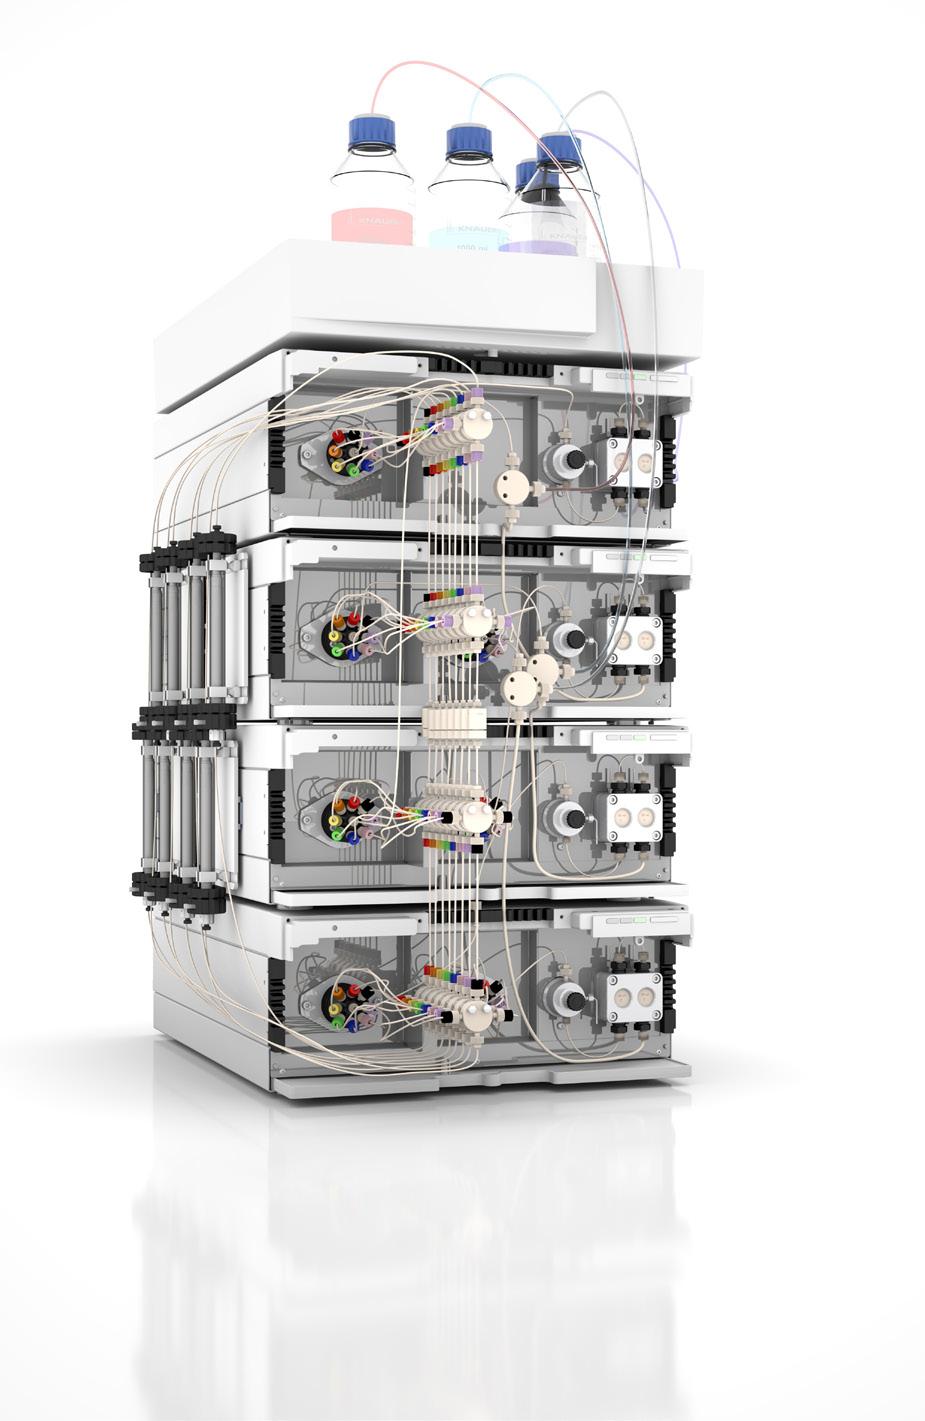 AZURA Multicolumn System configurator Why an 8 column setup is the best Three reasons why more columns are better The separation of biomolecules can also be done with 2, 3 or even 4 columns.